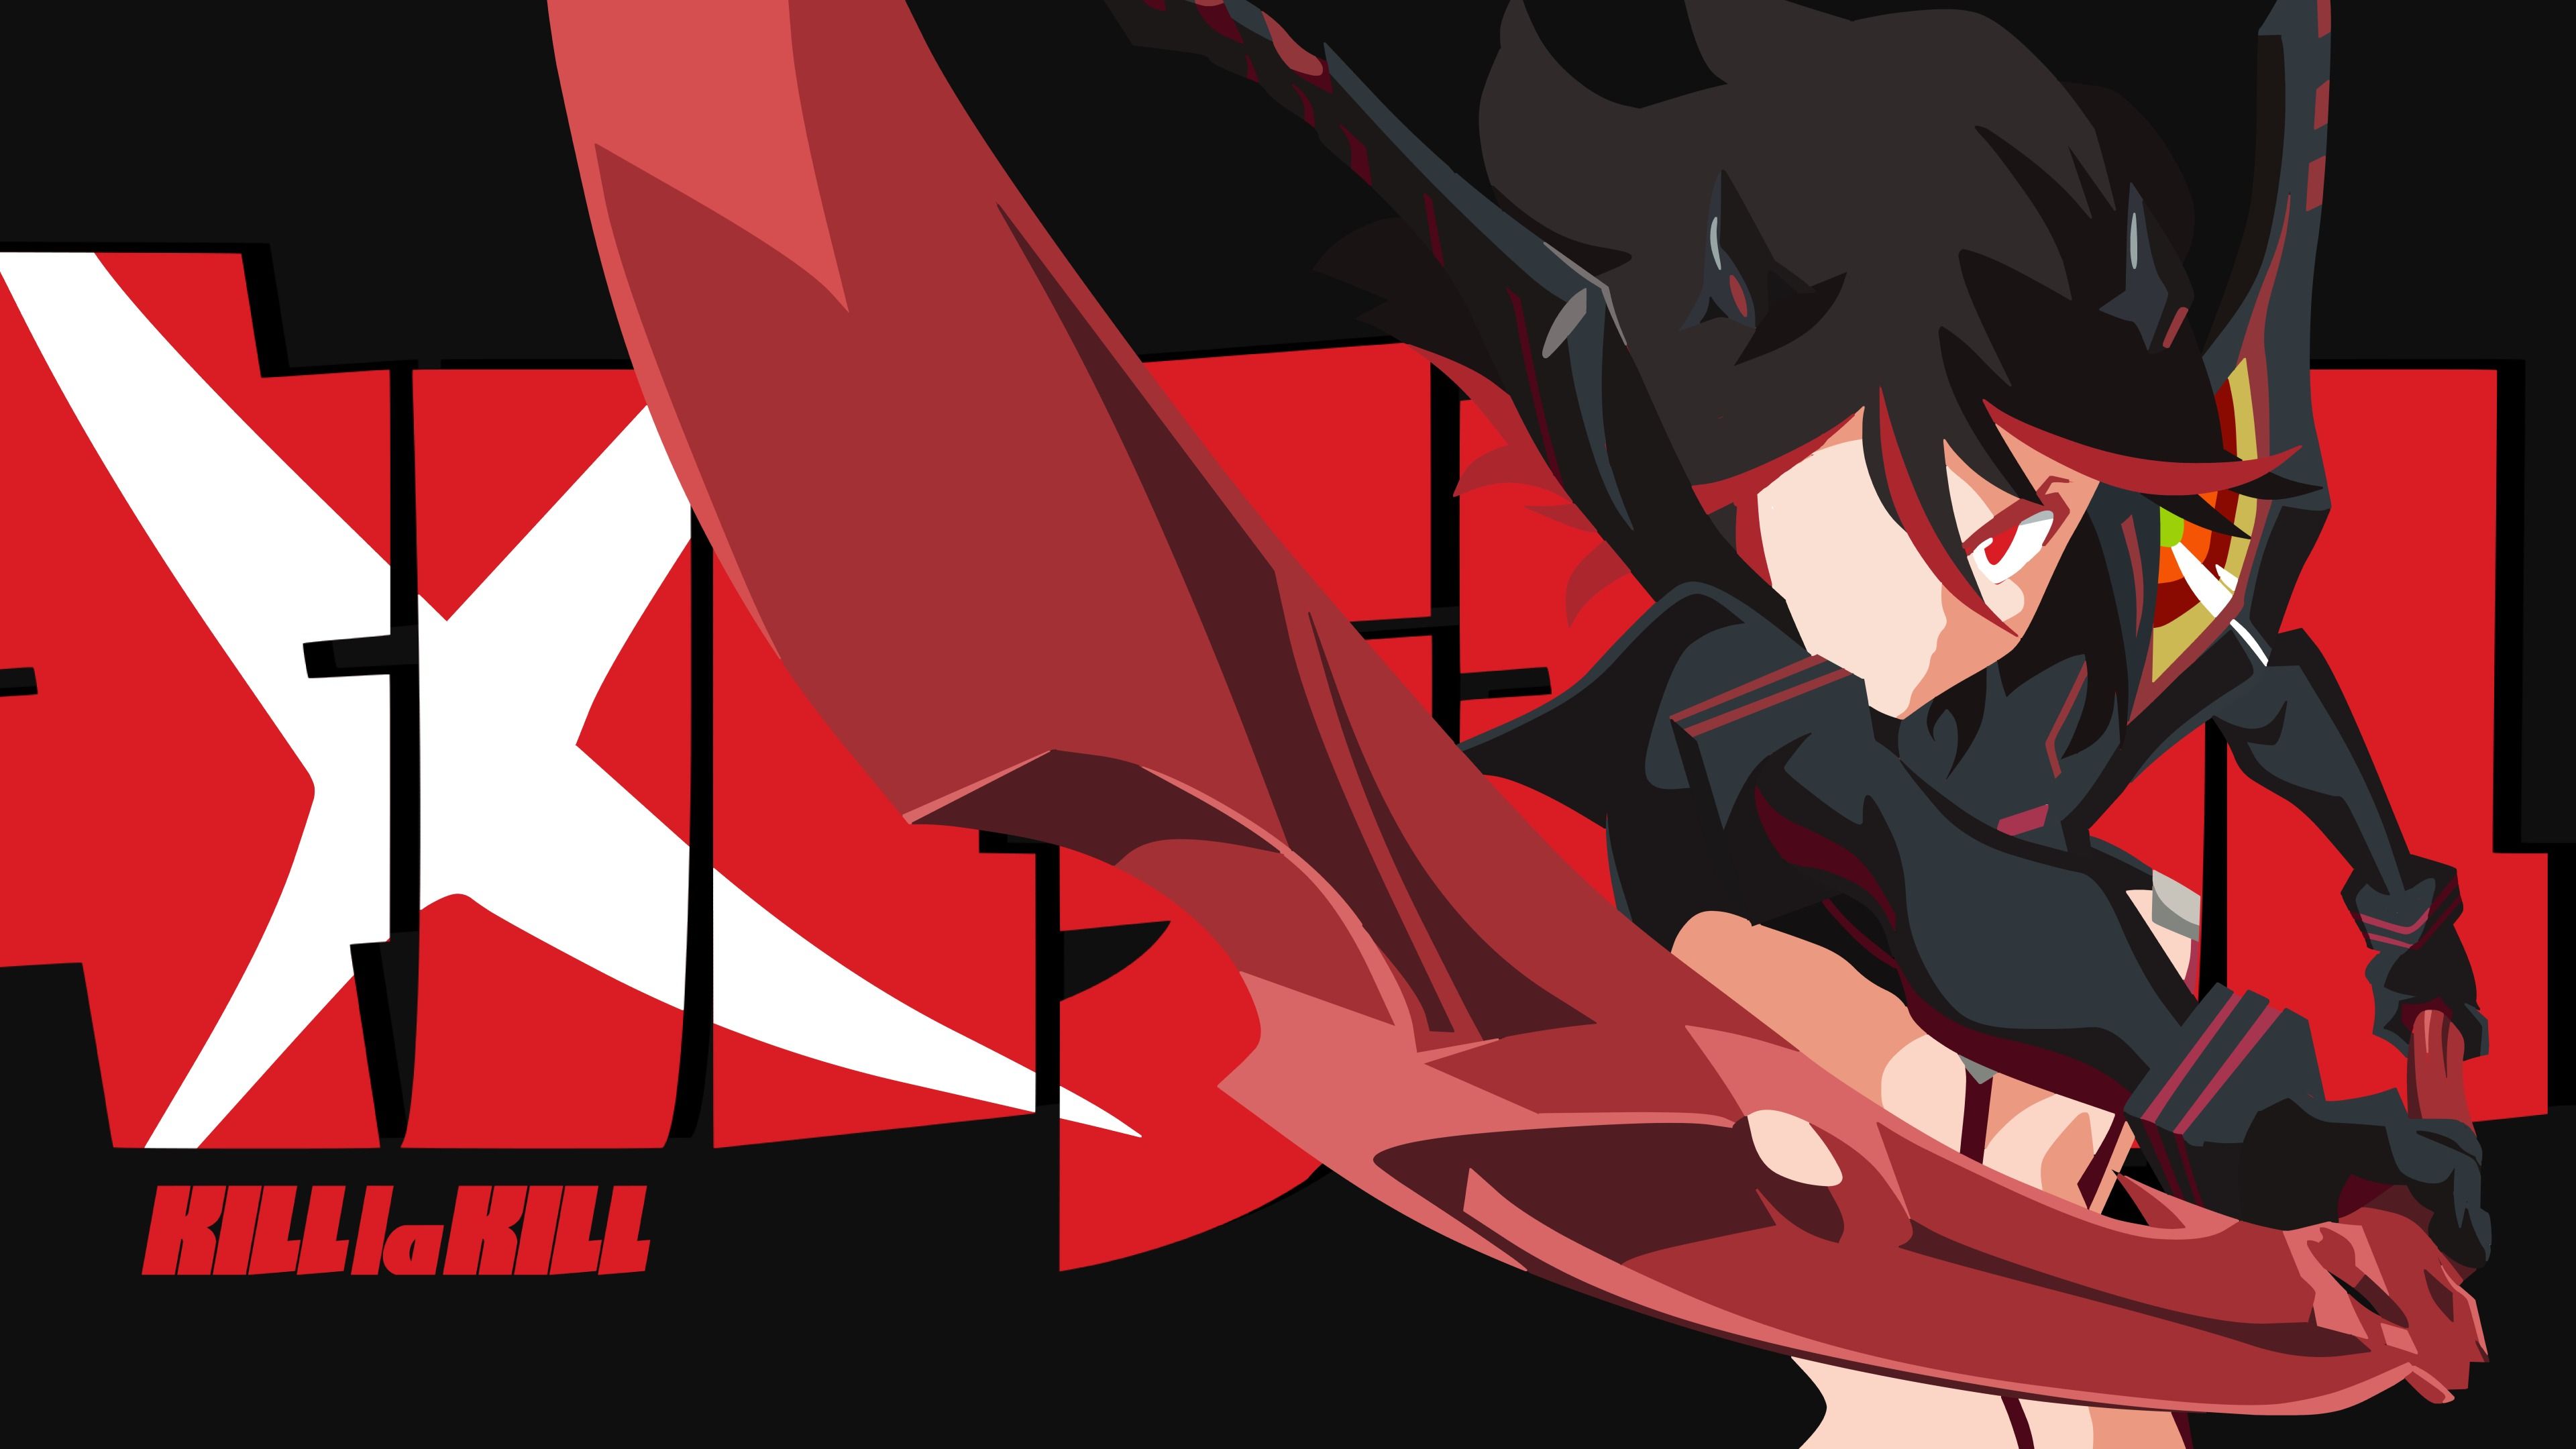 Download wallpaper from anime Kill La Kill with tags: Linux